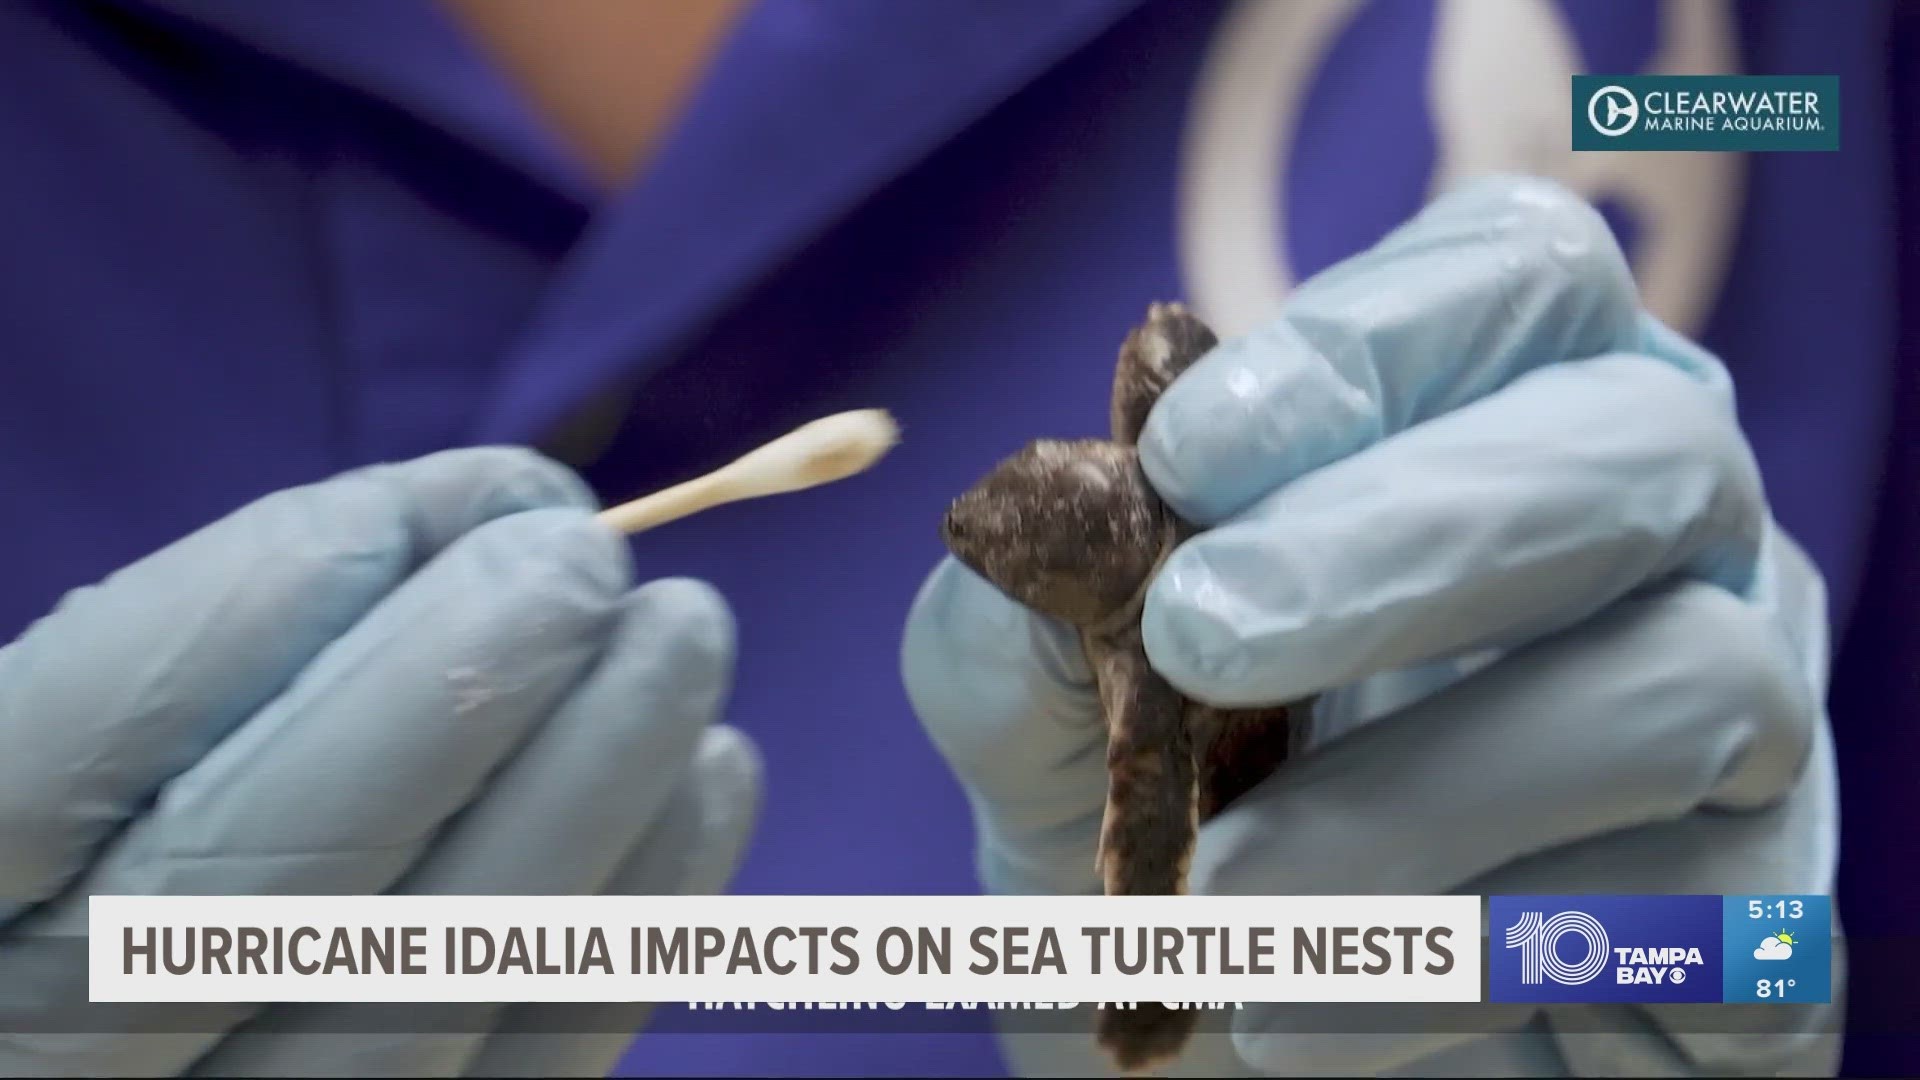 Clearwater Marine Aquarium said there were 75 unhatched sea turtle nests before Idalia. Only a fraction survived.